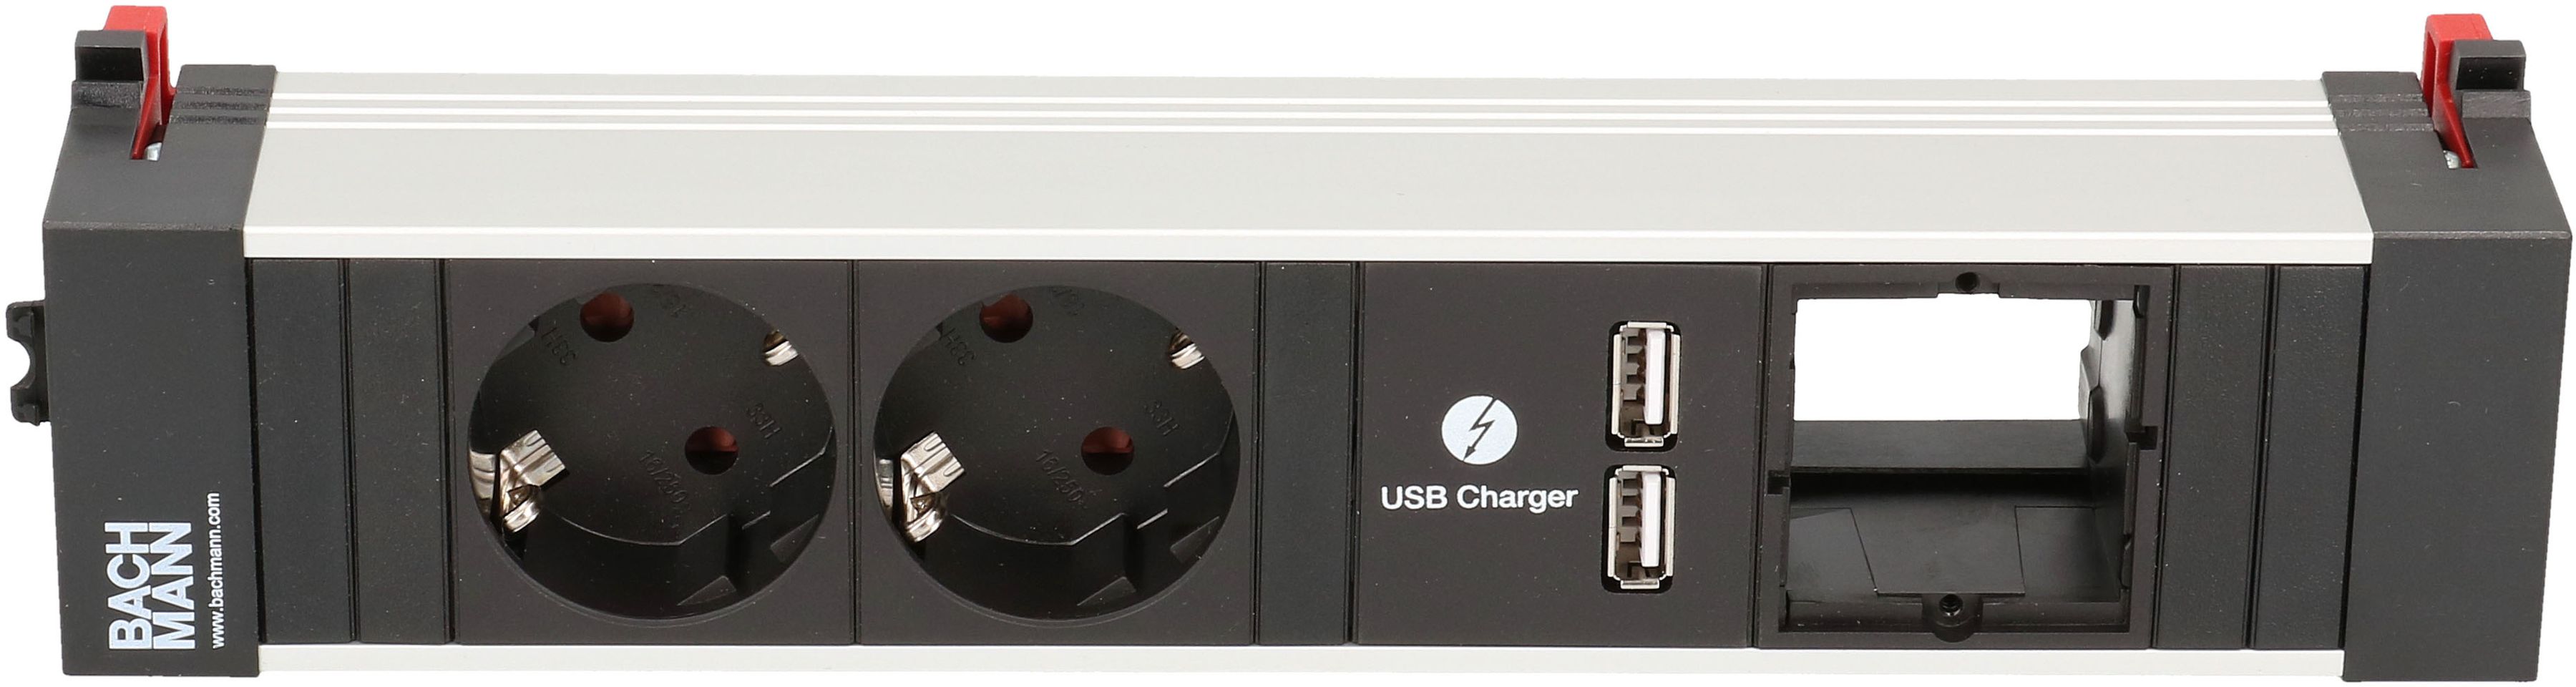 CONFERENCE 2x Schuko 1x Charger 1x Leer